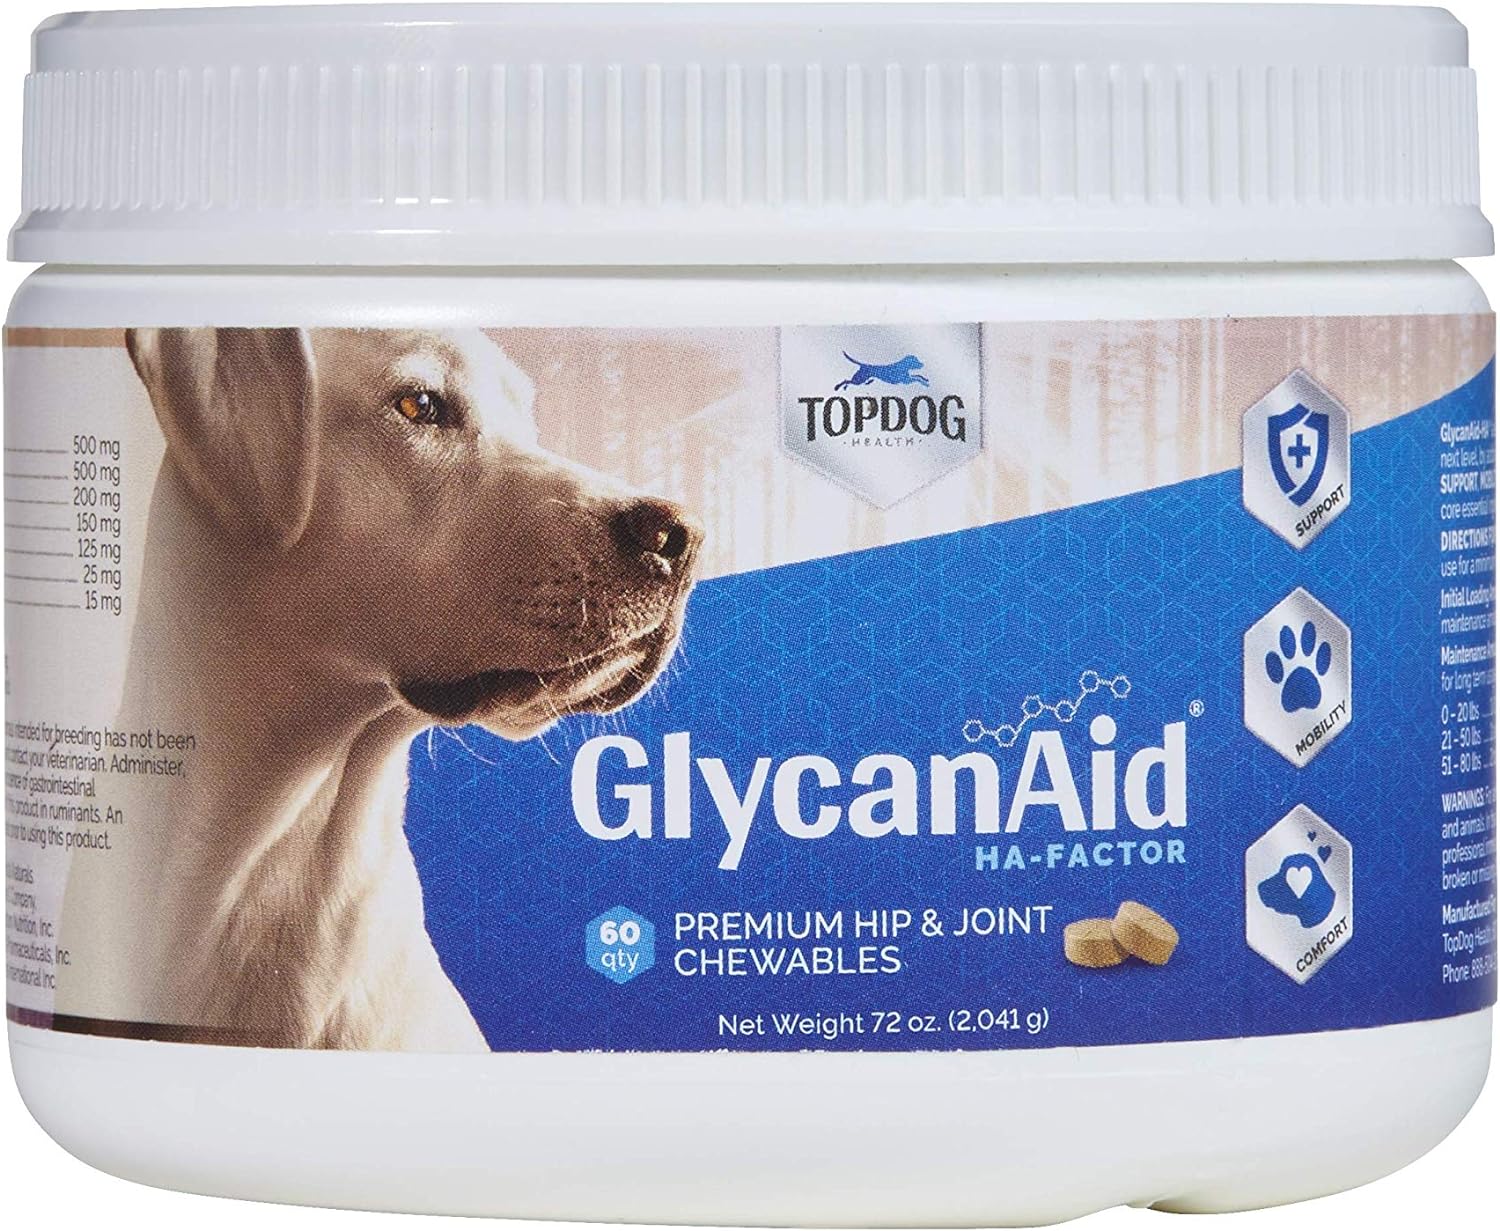 GlycanAid-HA Advanced Joint Supplement for Dogs (60 Chewable Tablets) - Made in USA with USA Ingredients - Contains Glucosamine HCL, Chondroitin Sulfate, Hyaluronic Acid, MSM, Cetyl-M